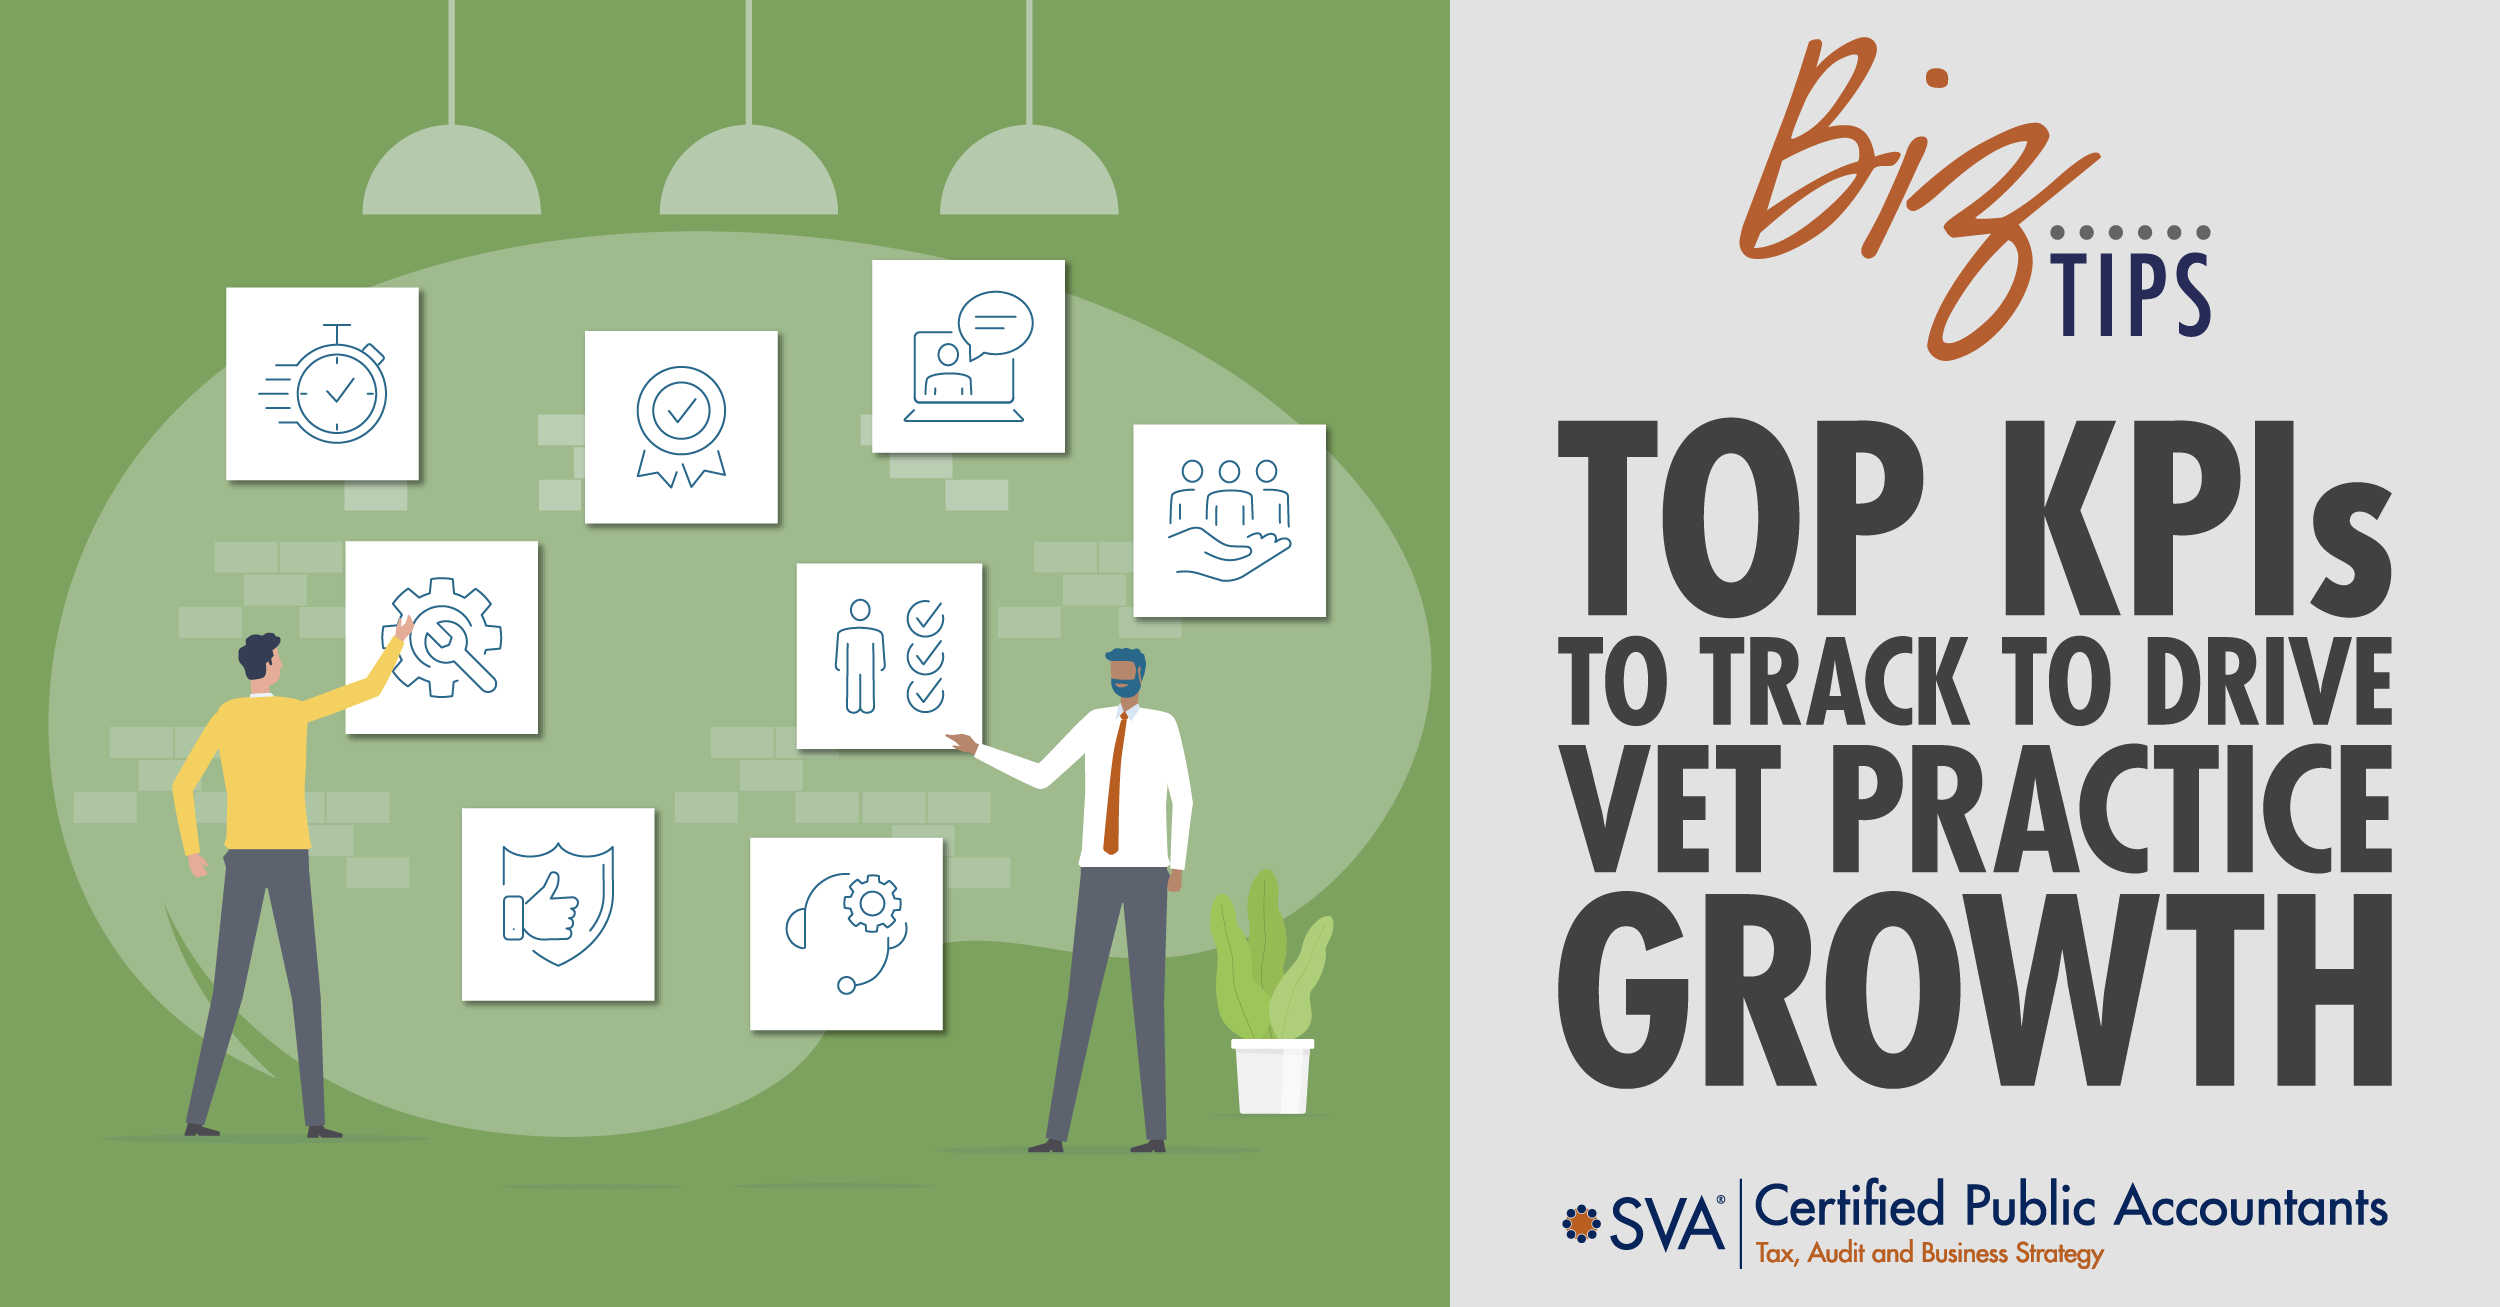 Top KPIs to Track to Drive Vet Practice Growth